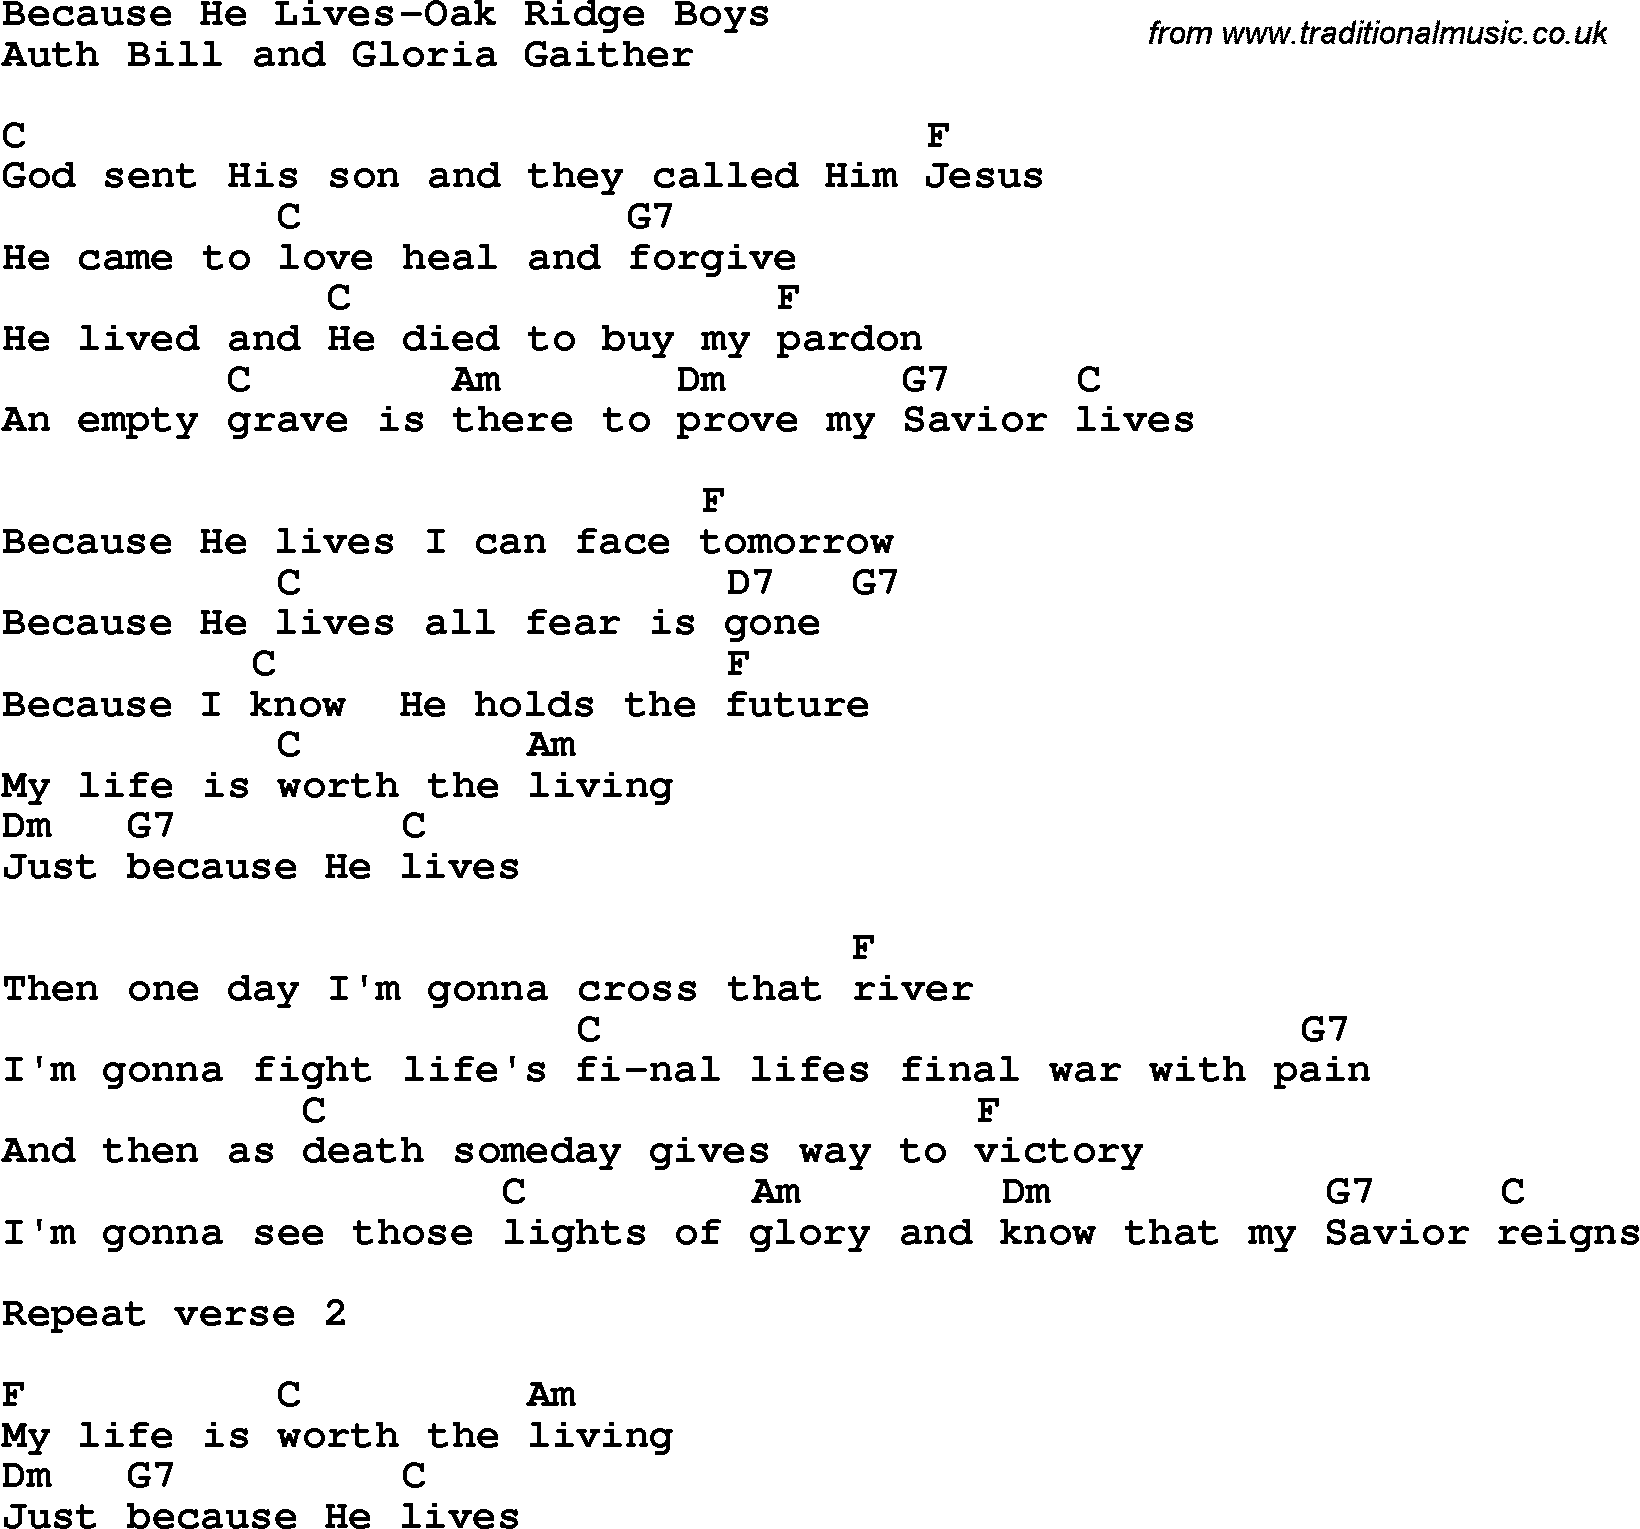 Country, Southern and Bluegrass Gospel Song Because He Lives-Oak Ridge Boys lyrics and chords